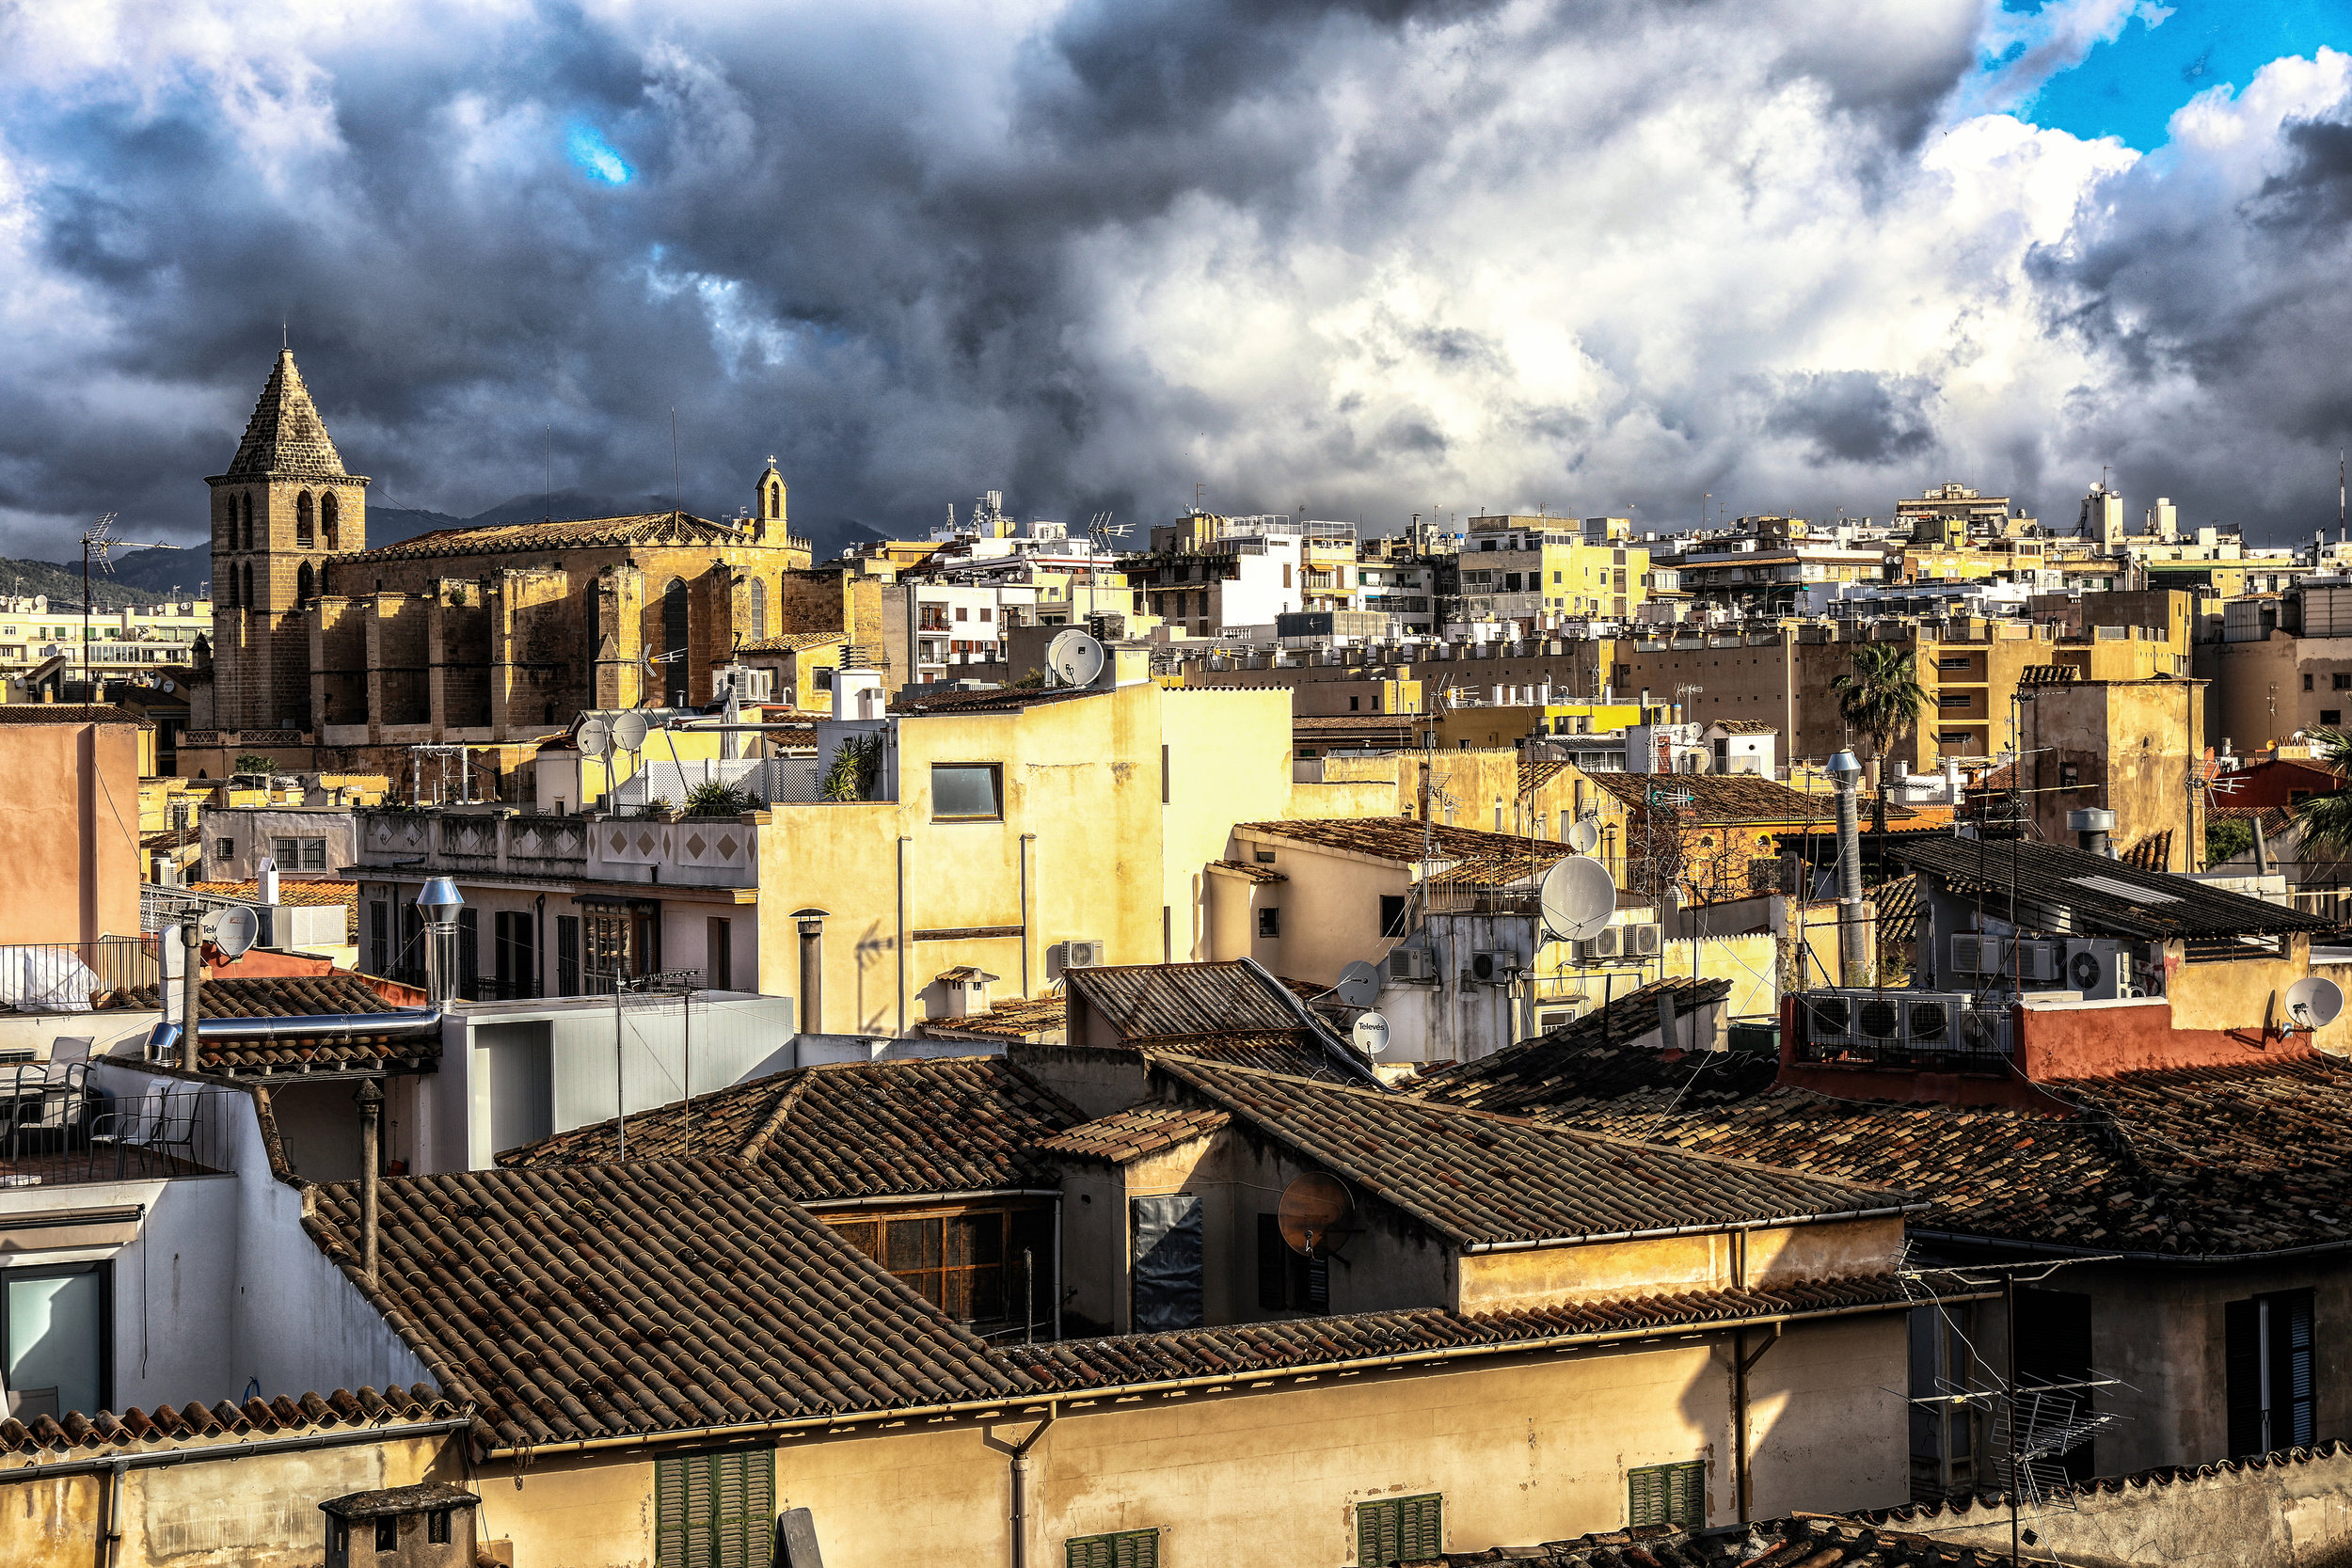 View of Stormy Palma from Rooftops